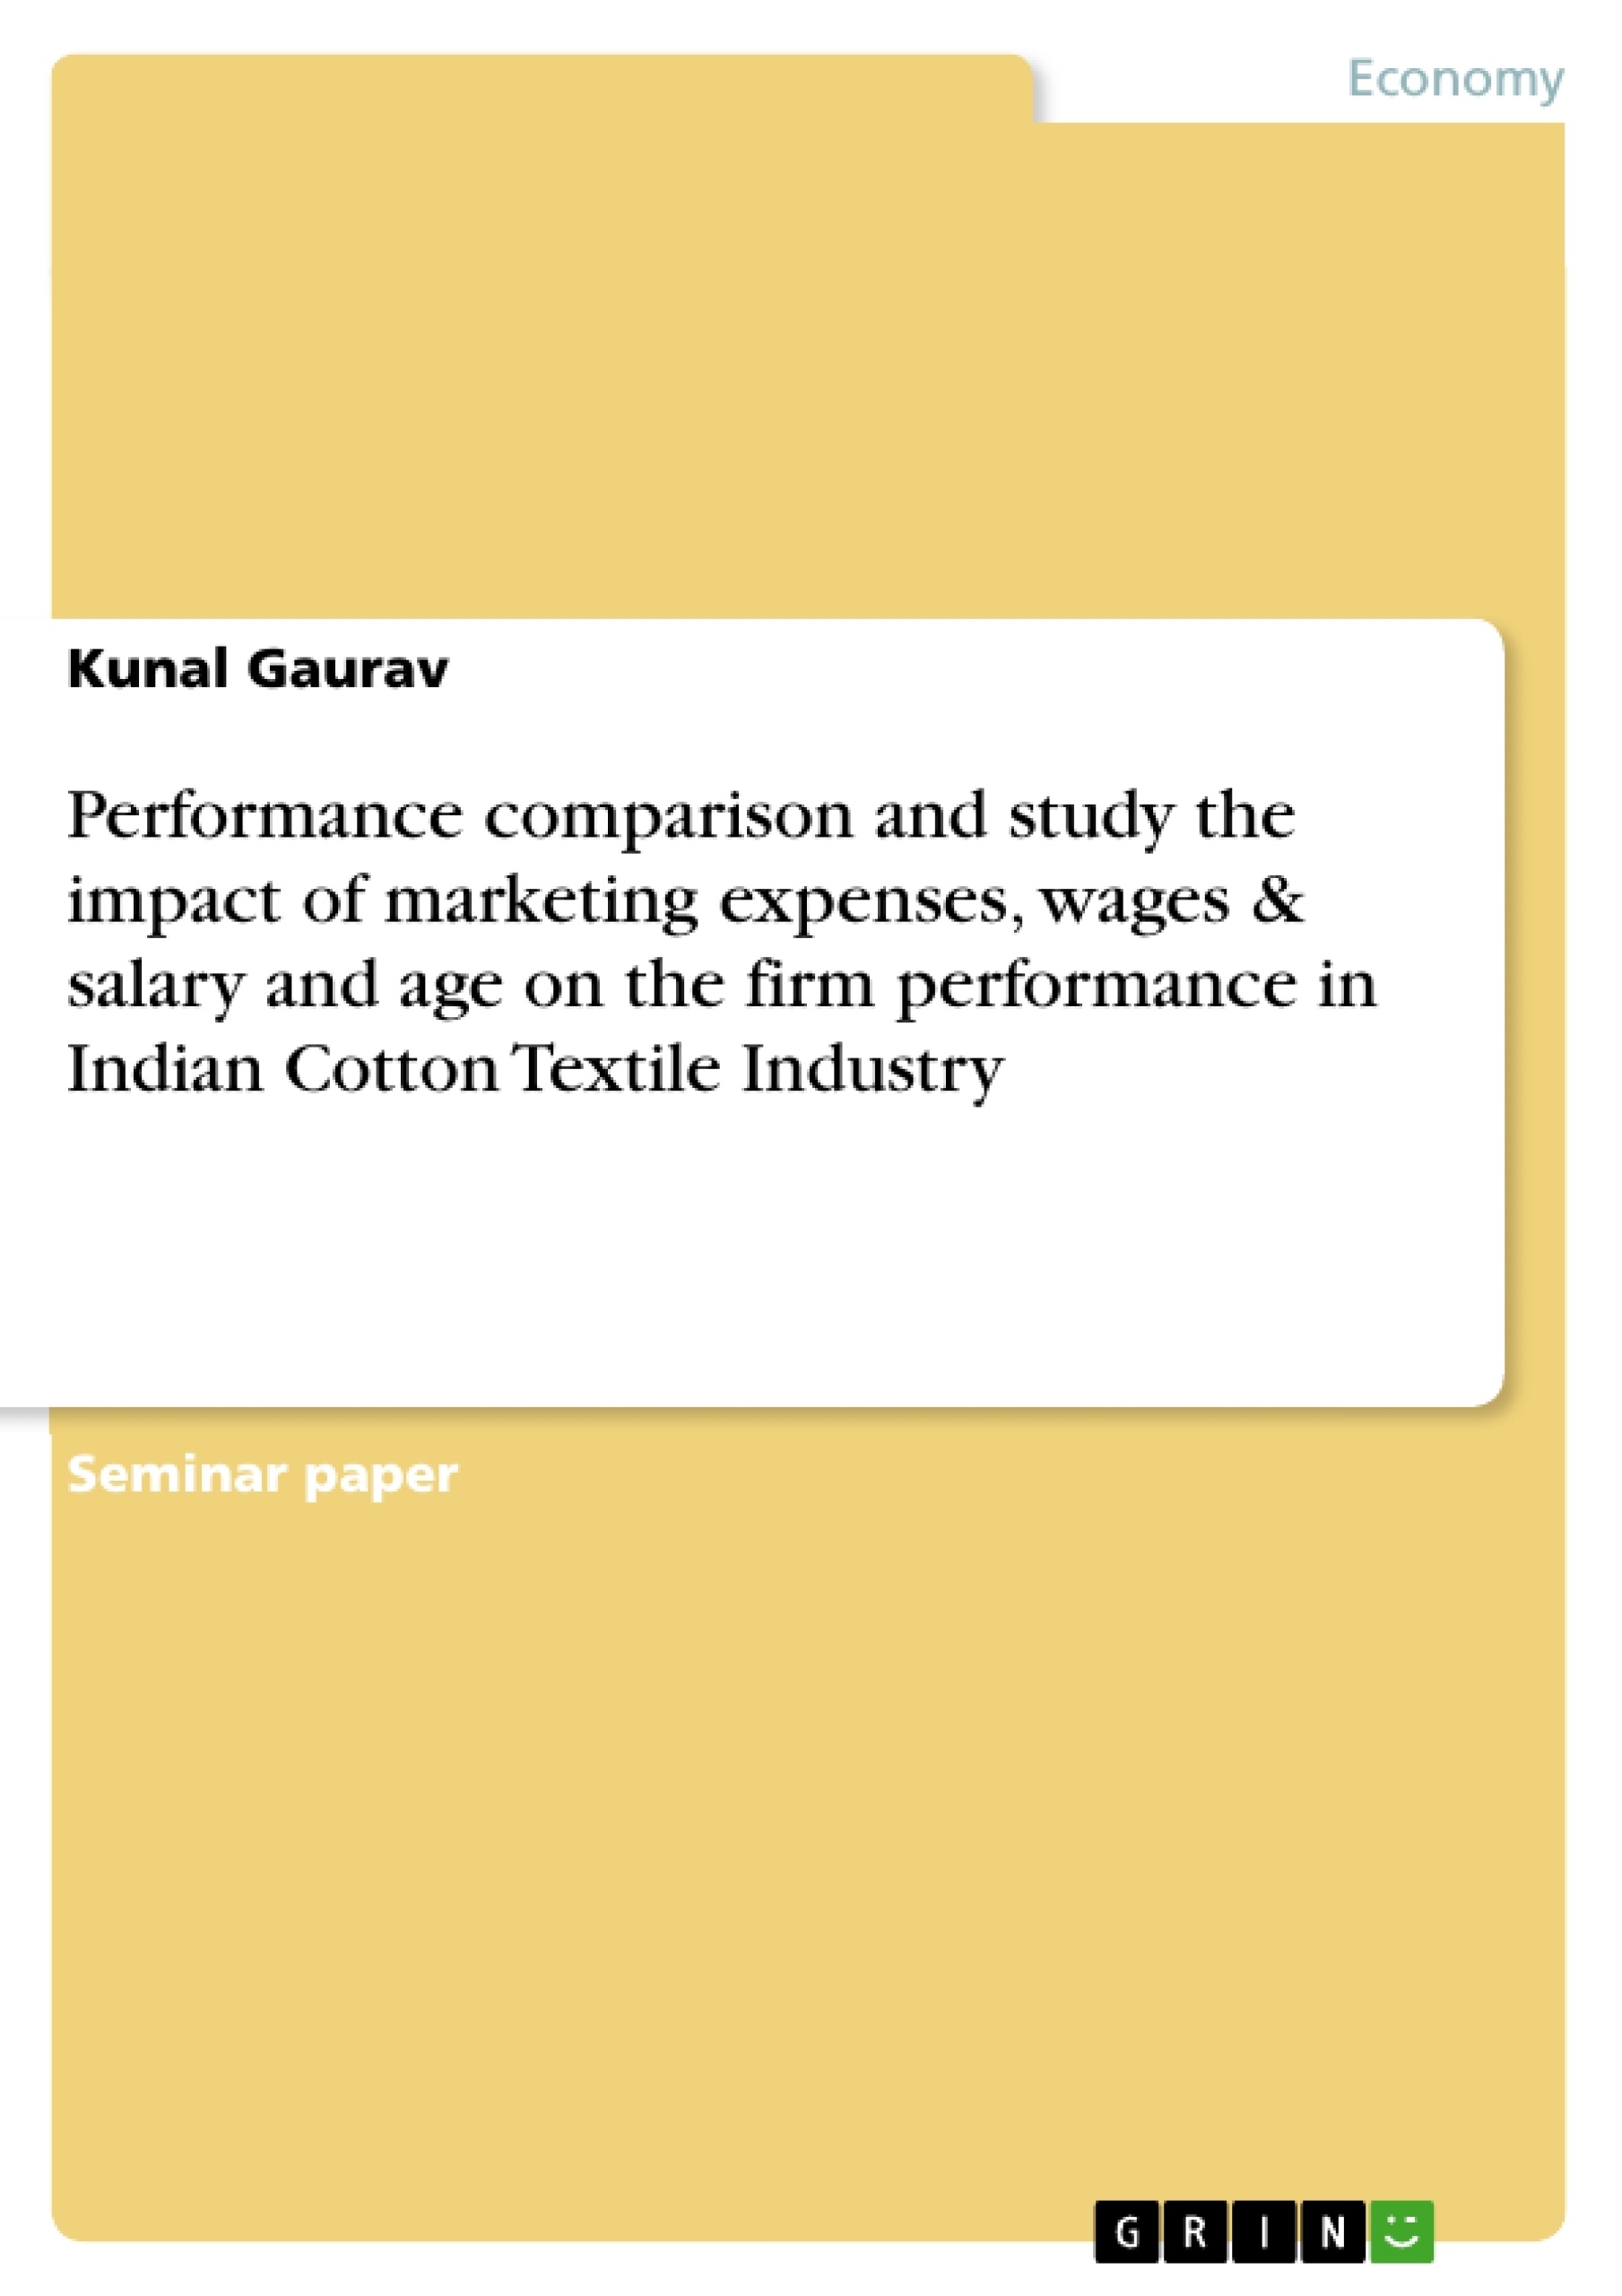 Title: Performance comparison and study the impact of marketing expenses, wages & salary and age on the firm performance in Indian Cotton Textile Industry